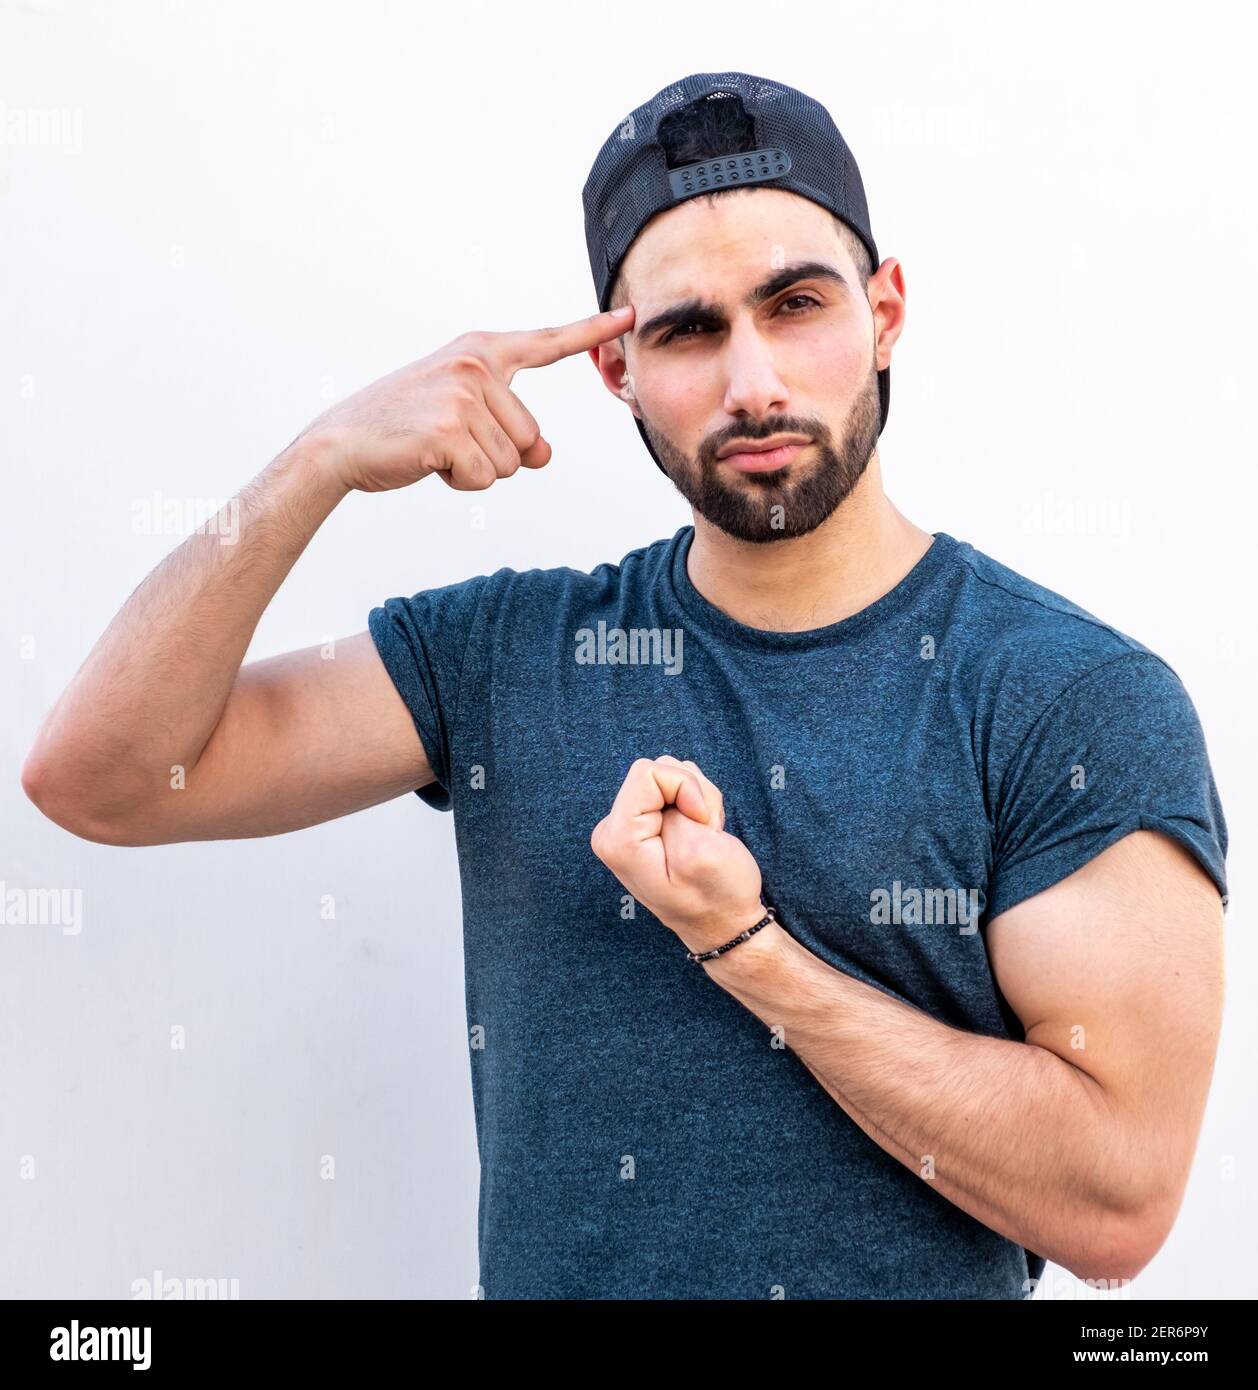 Guy pointing at his big strong hand muscle Stock Photo - Alamy